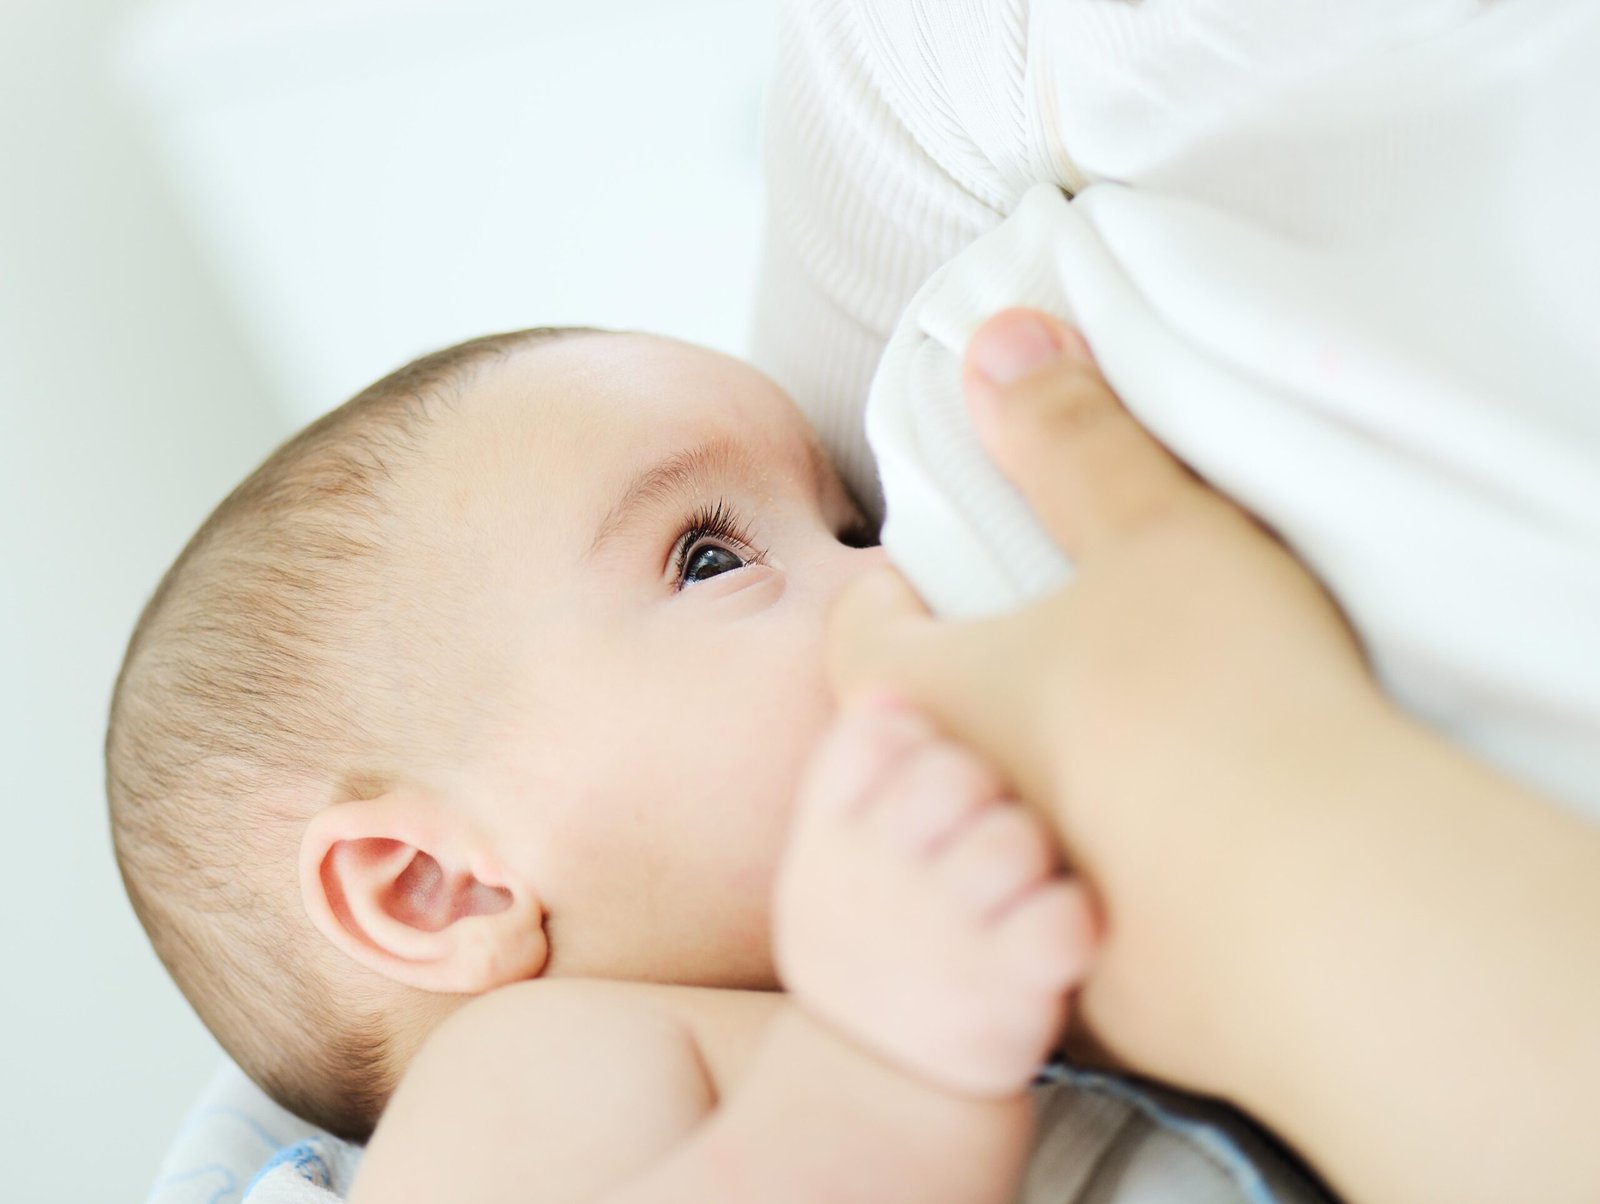 Baby feeds on mother's breasts milk